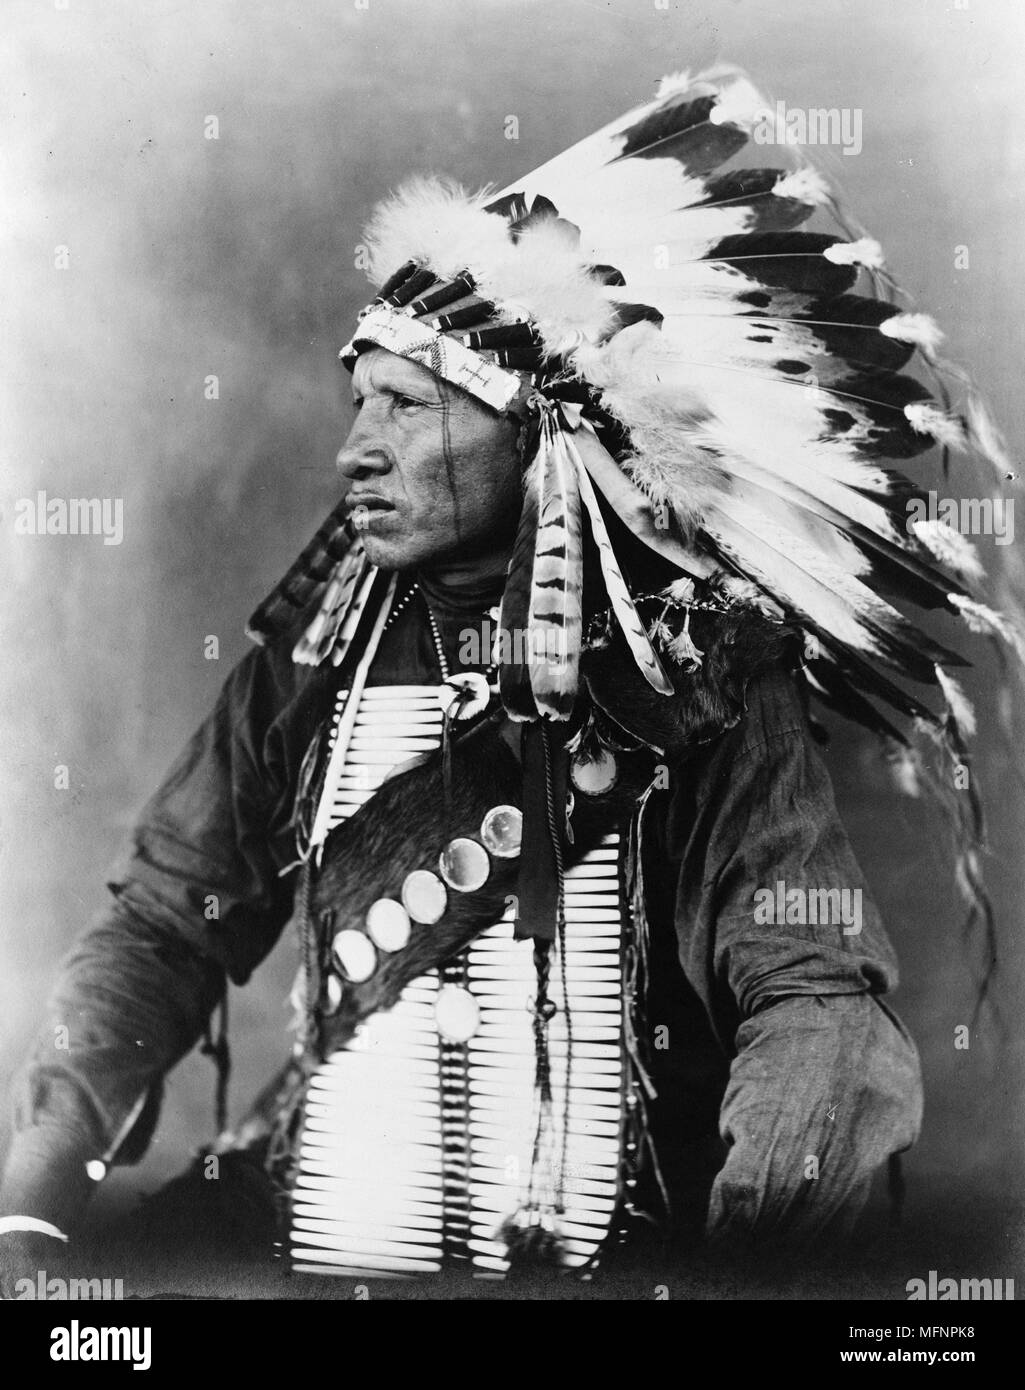 Red Bird, Sioux Indian, half-length portrait, seated, facing left, wearing feathered headdress, c1908. Photograph by John A. Johnson Stock Photo